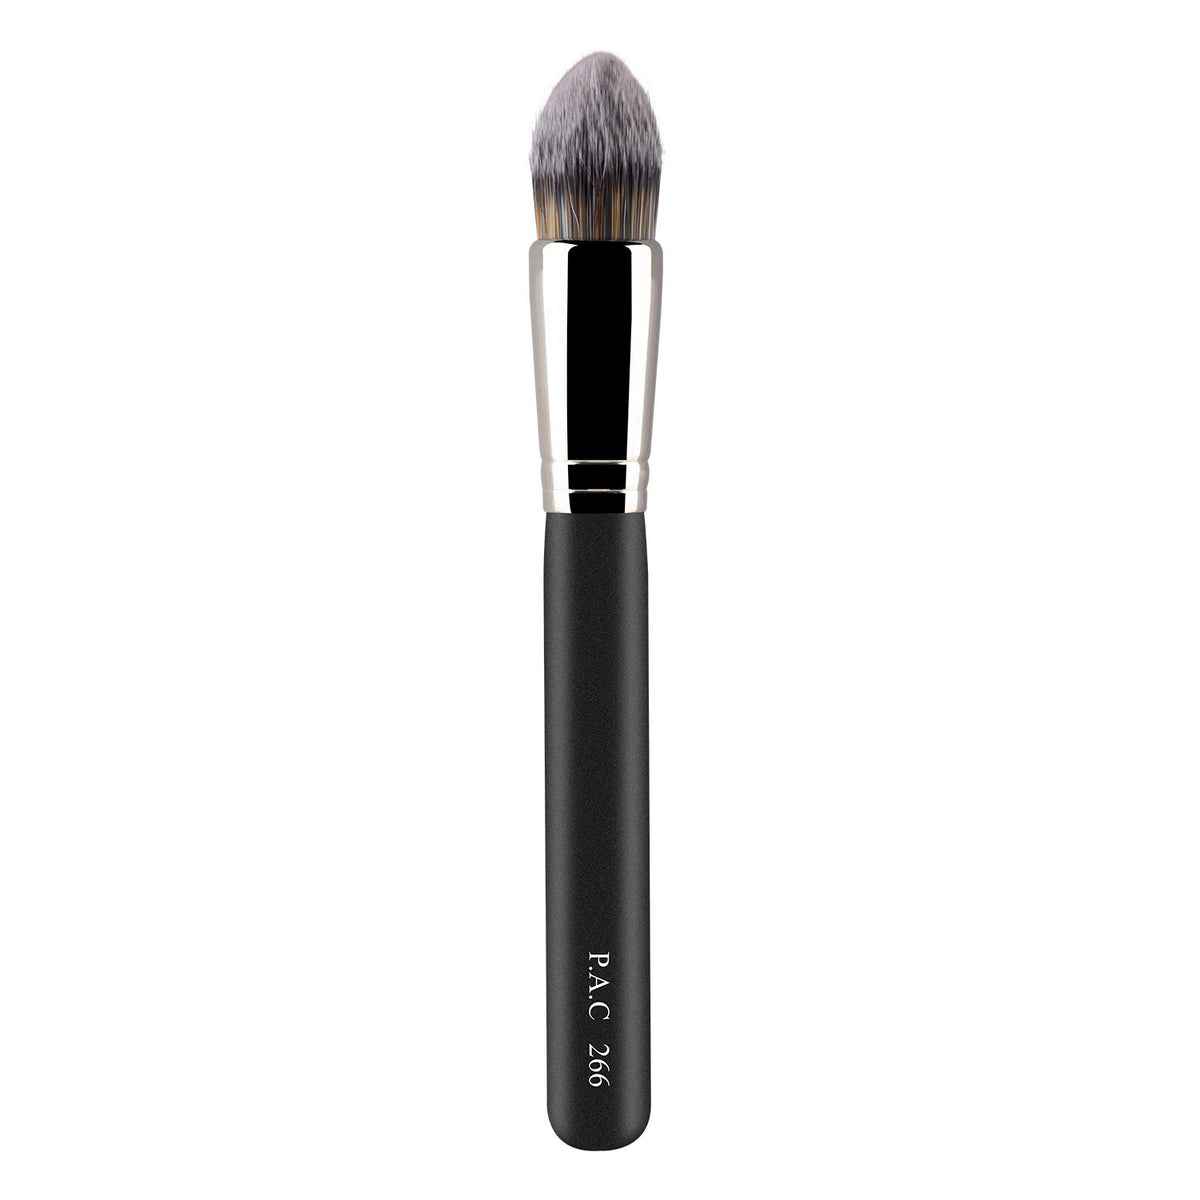 PAC Concealer Brush 266 PAC